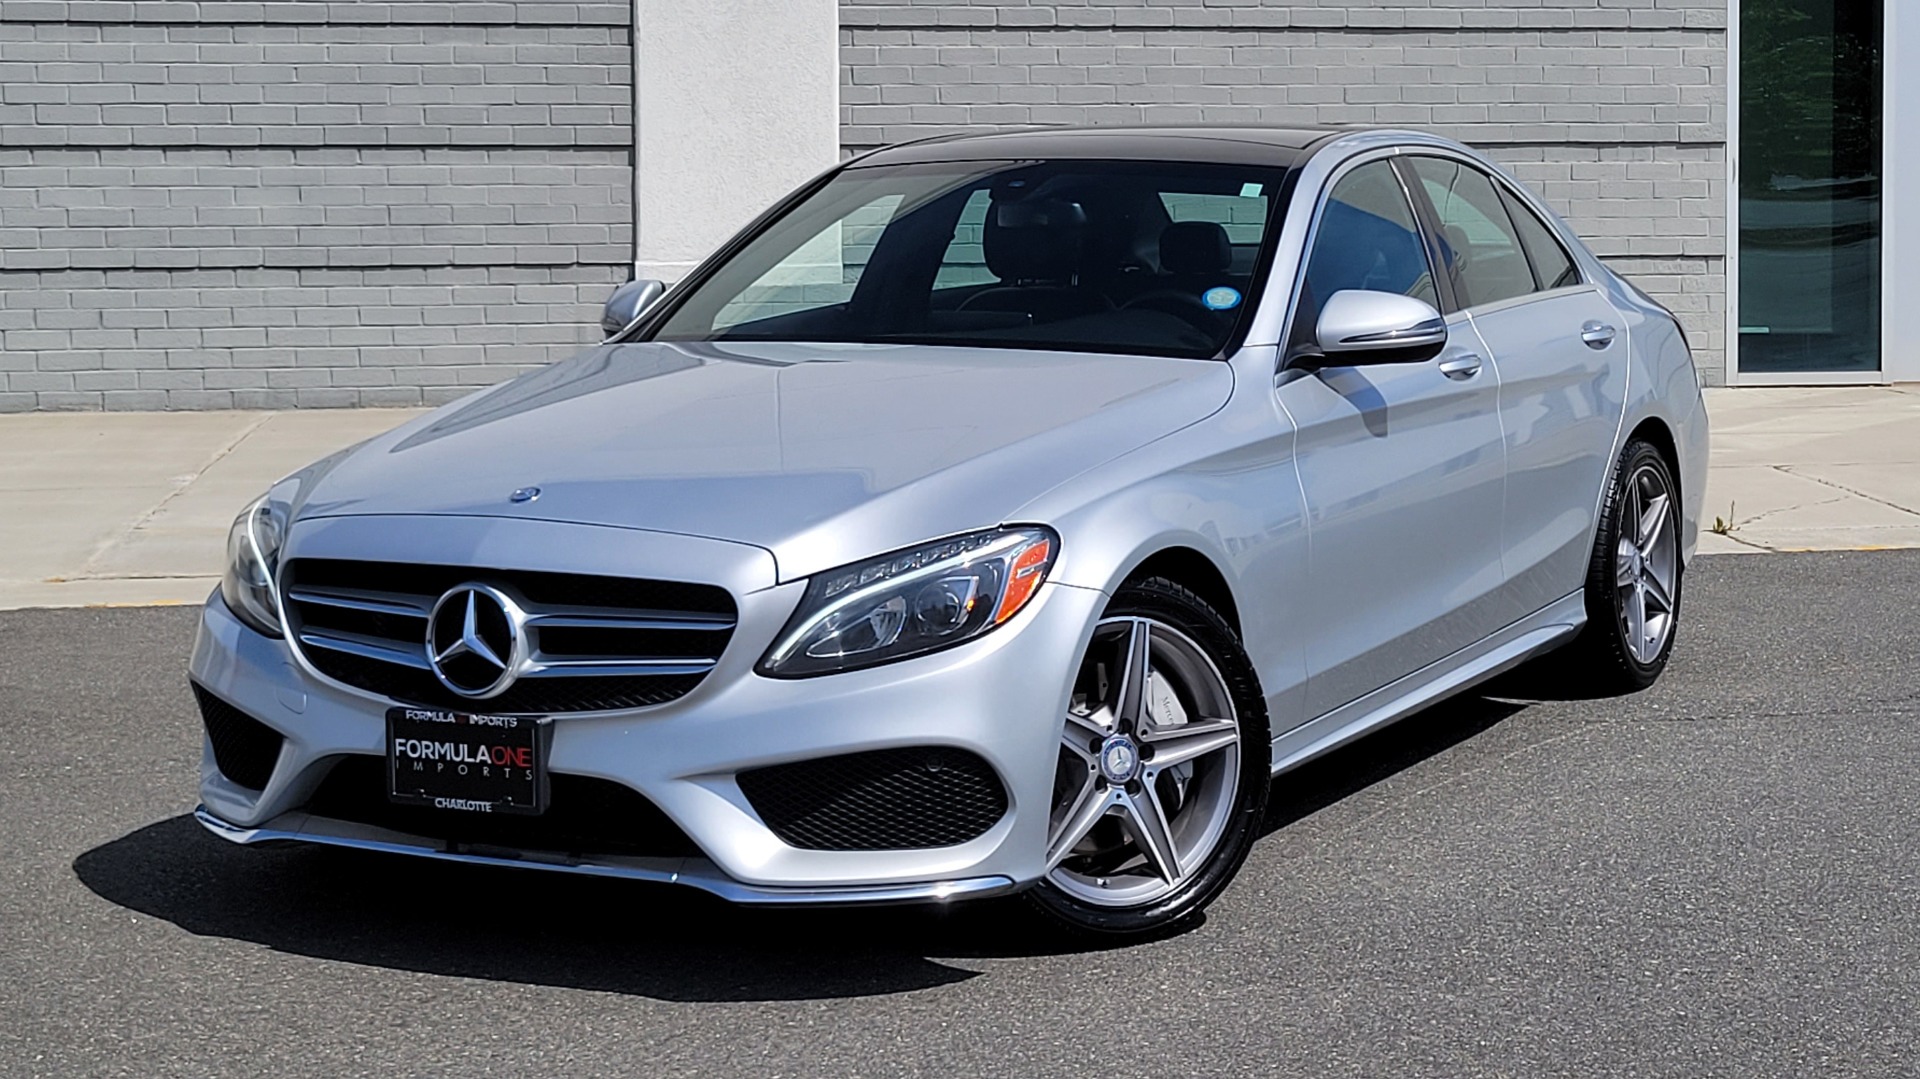 Used 2016 Mercedes-Benz C-CLASS C 300 PREMIUM 2 / SPORT / PANO-ROOF / BSA / HTD STS / MULTIMEDIA for sale $23,995 at Formula Imports in Charlotte NC 28227 1